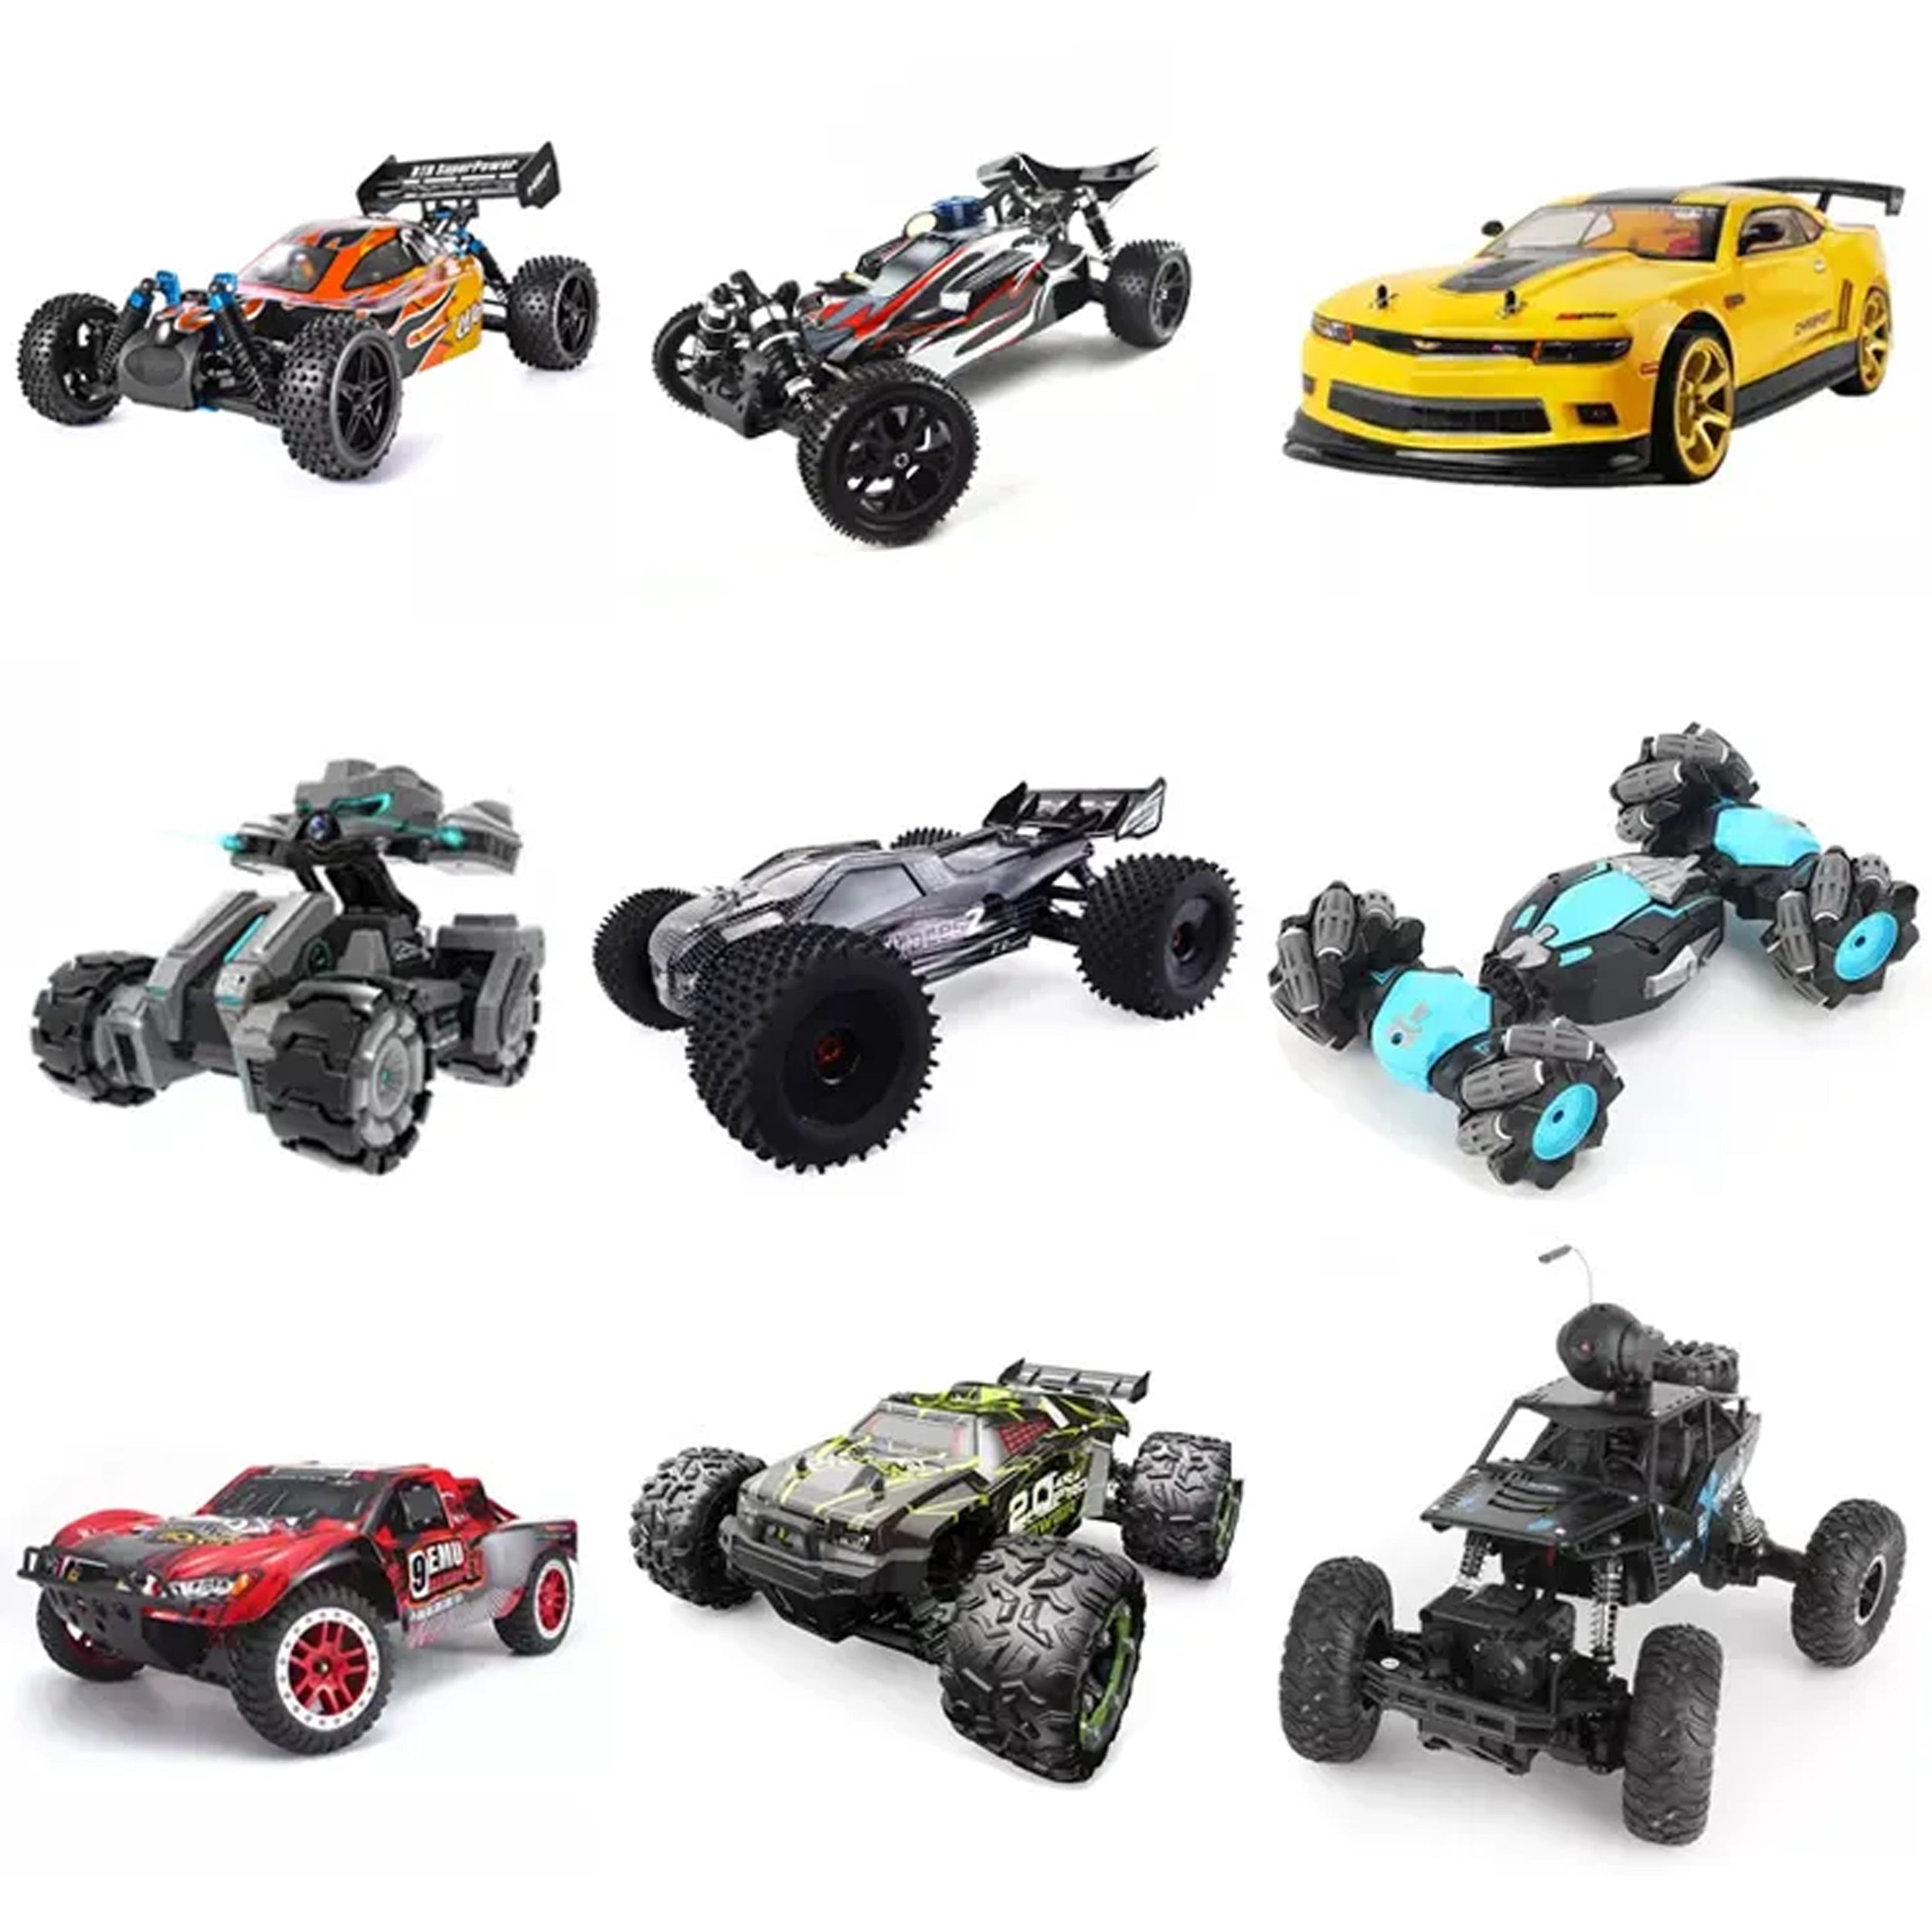 Monster Truck Remote Control Car Toy